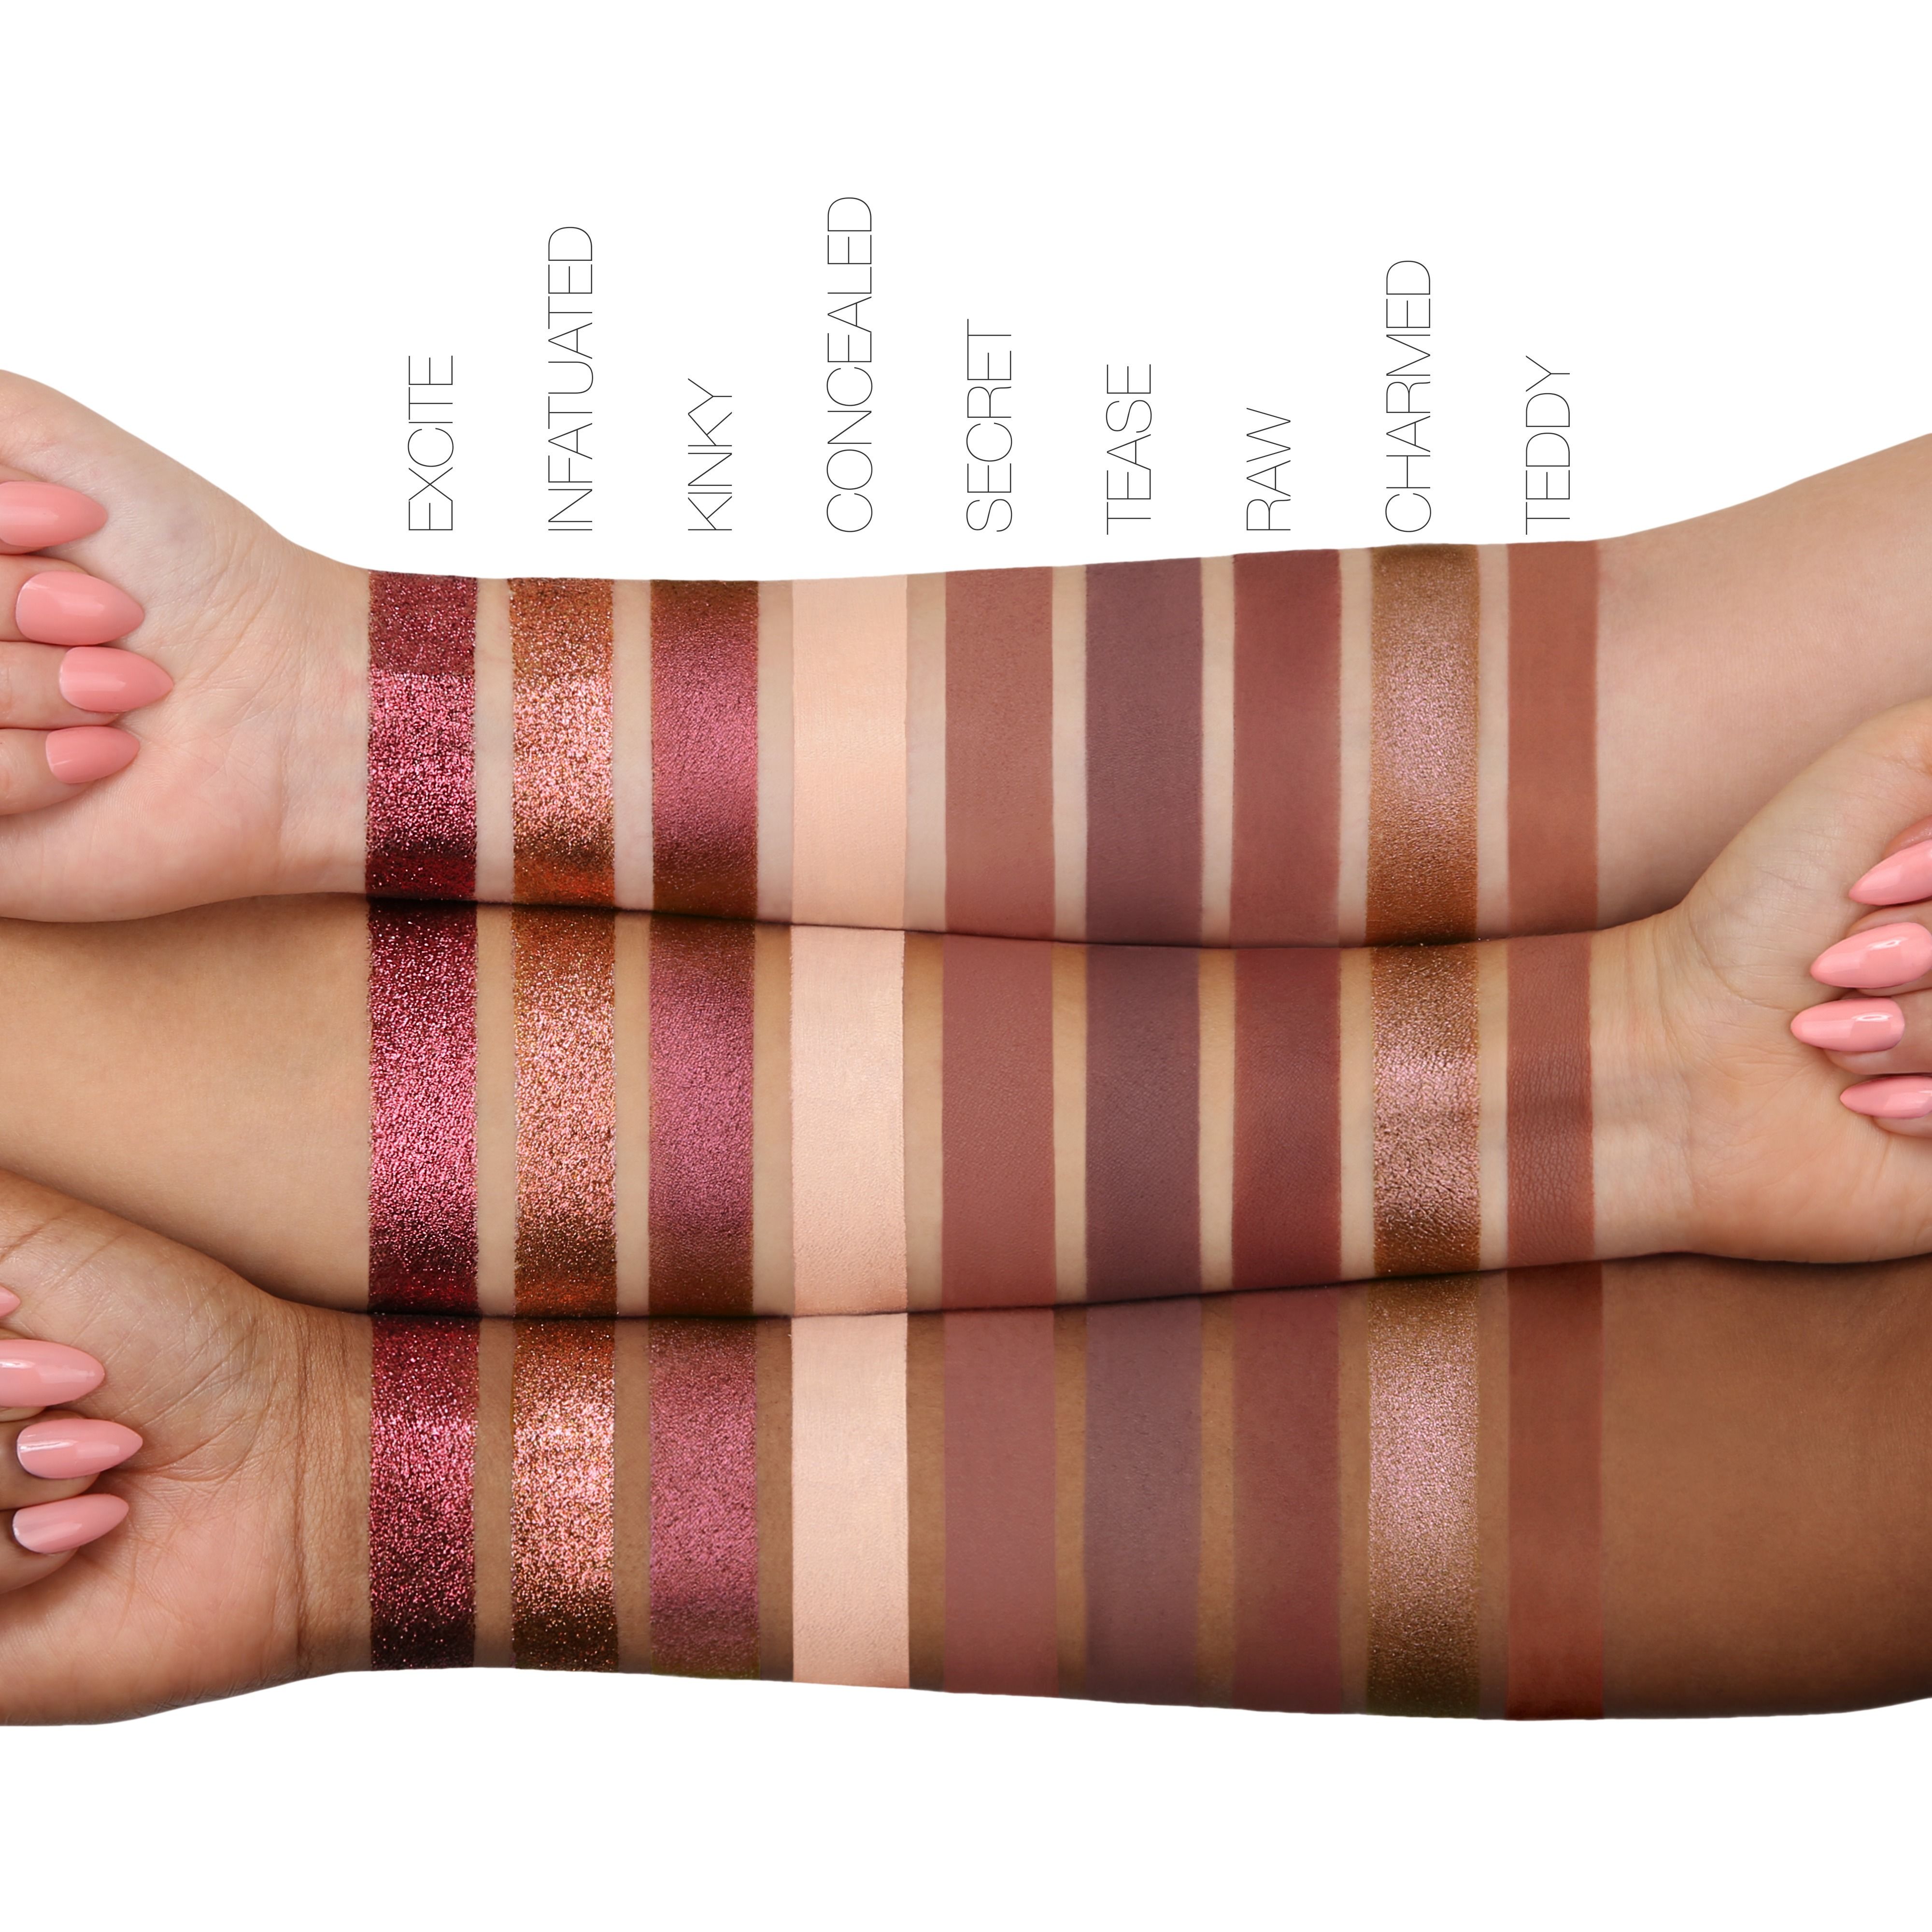 Nude Huda palette swatches 2